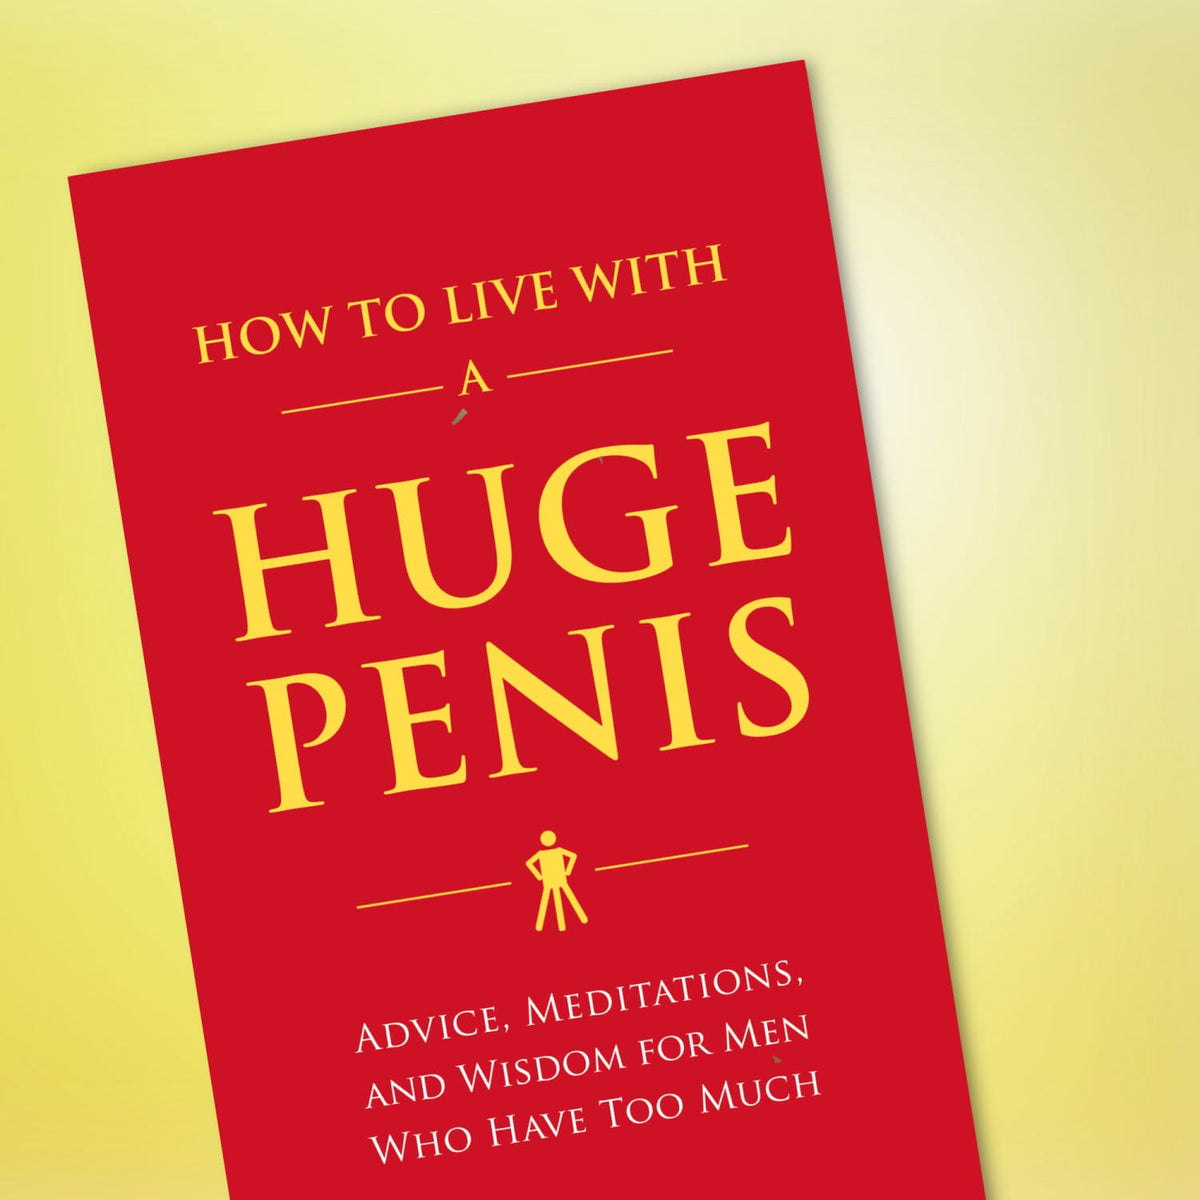 How To Live With a Huge Penis 1022 - Bookbuild22 - 